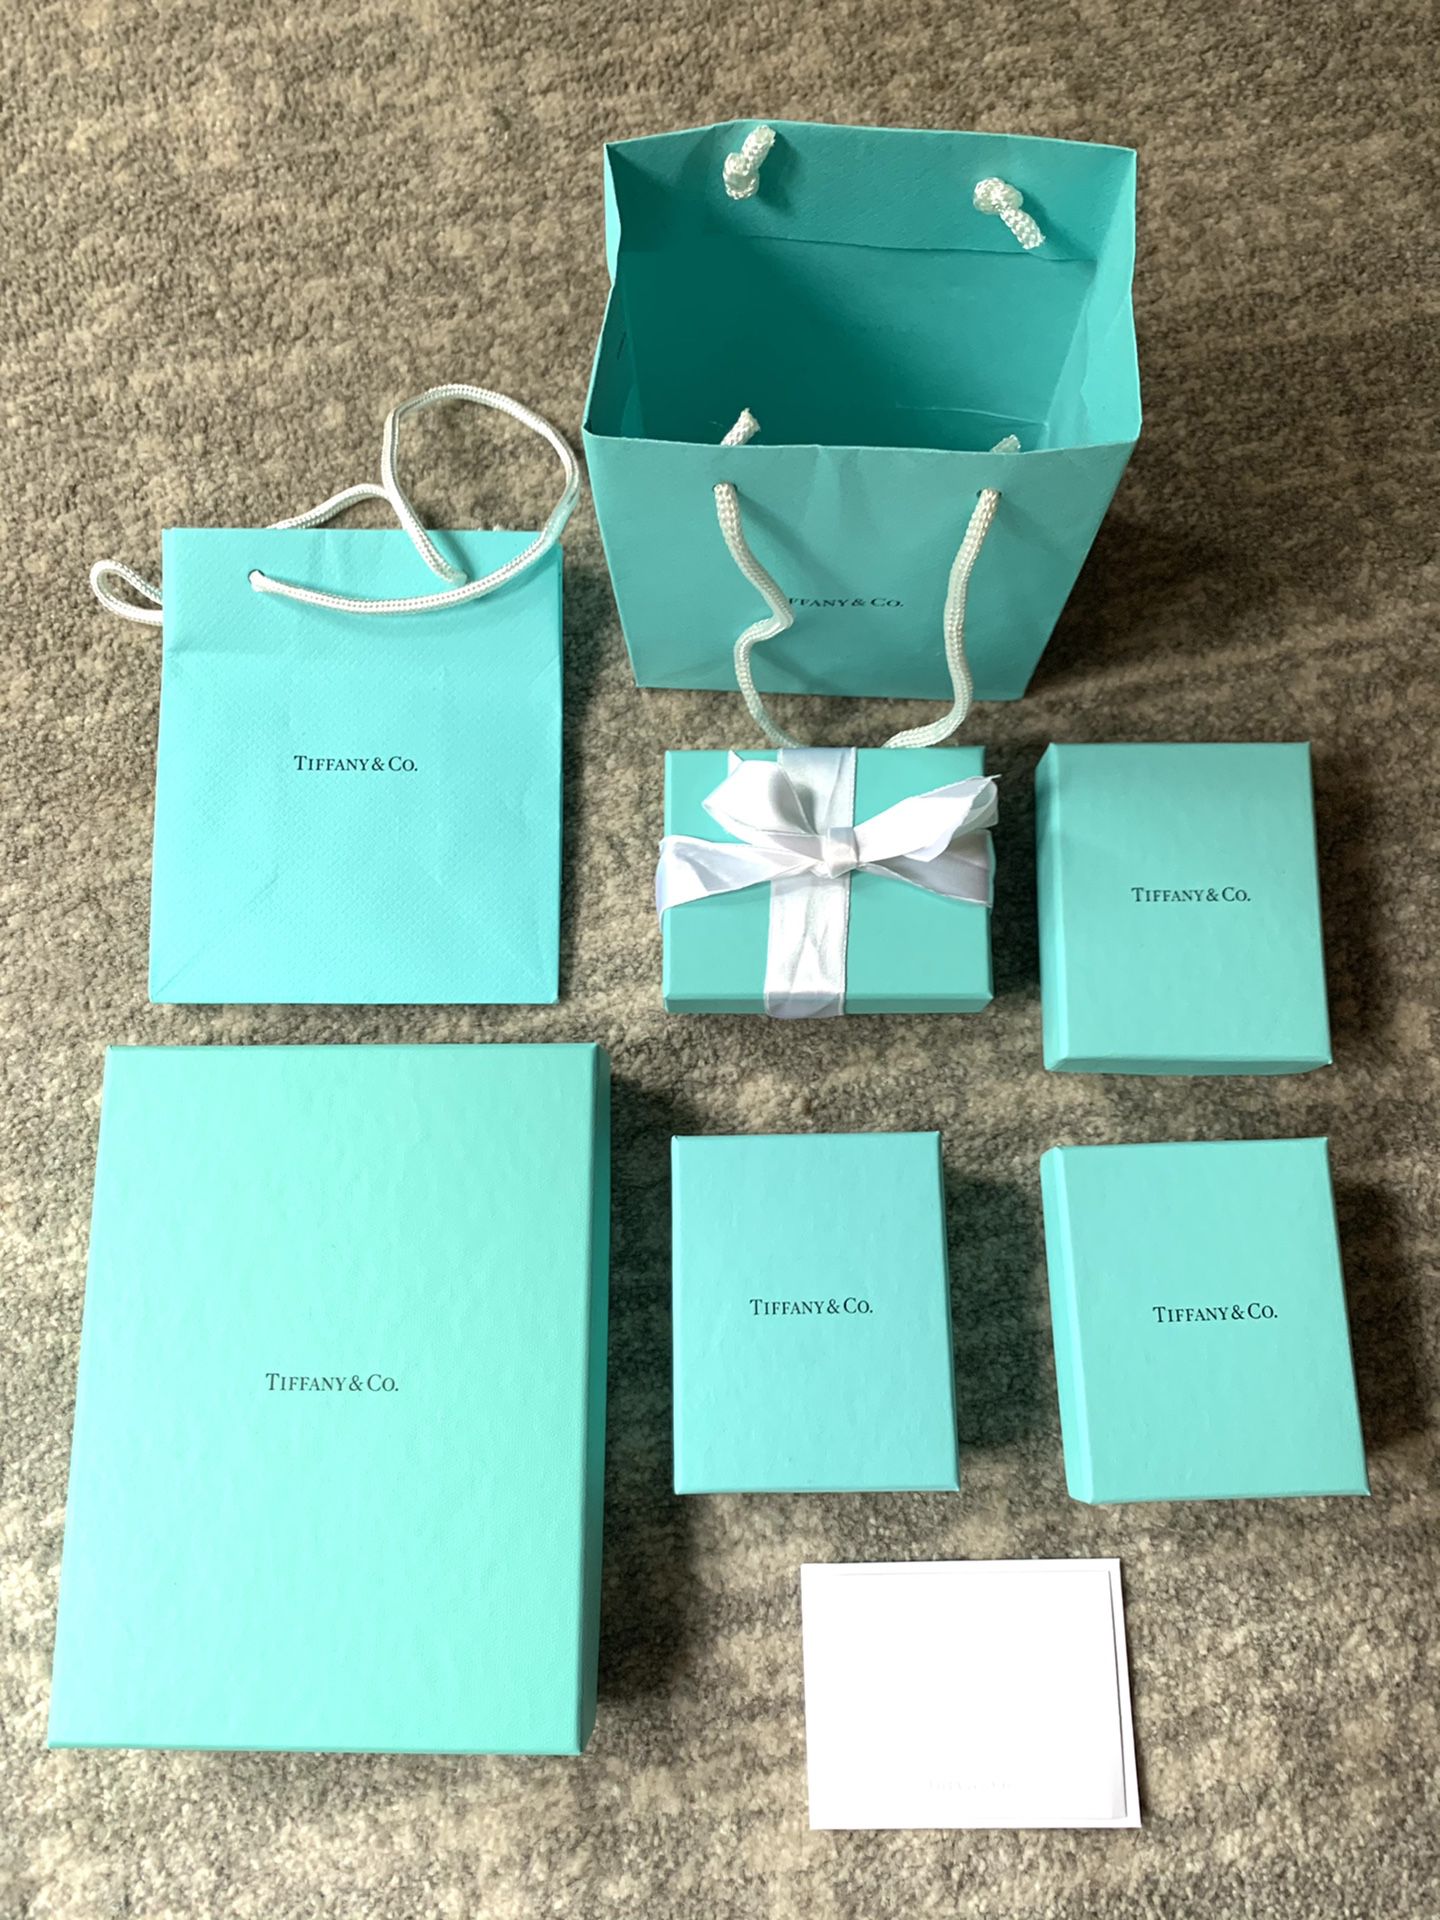 Tiffany & Co jewelry boxes and bags